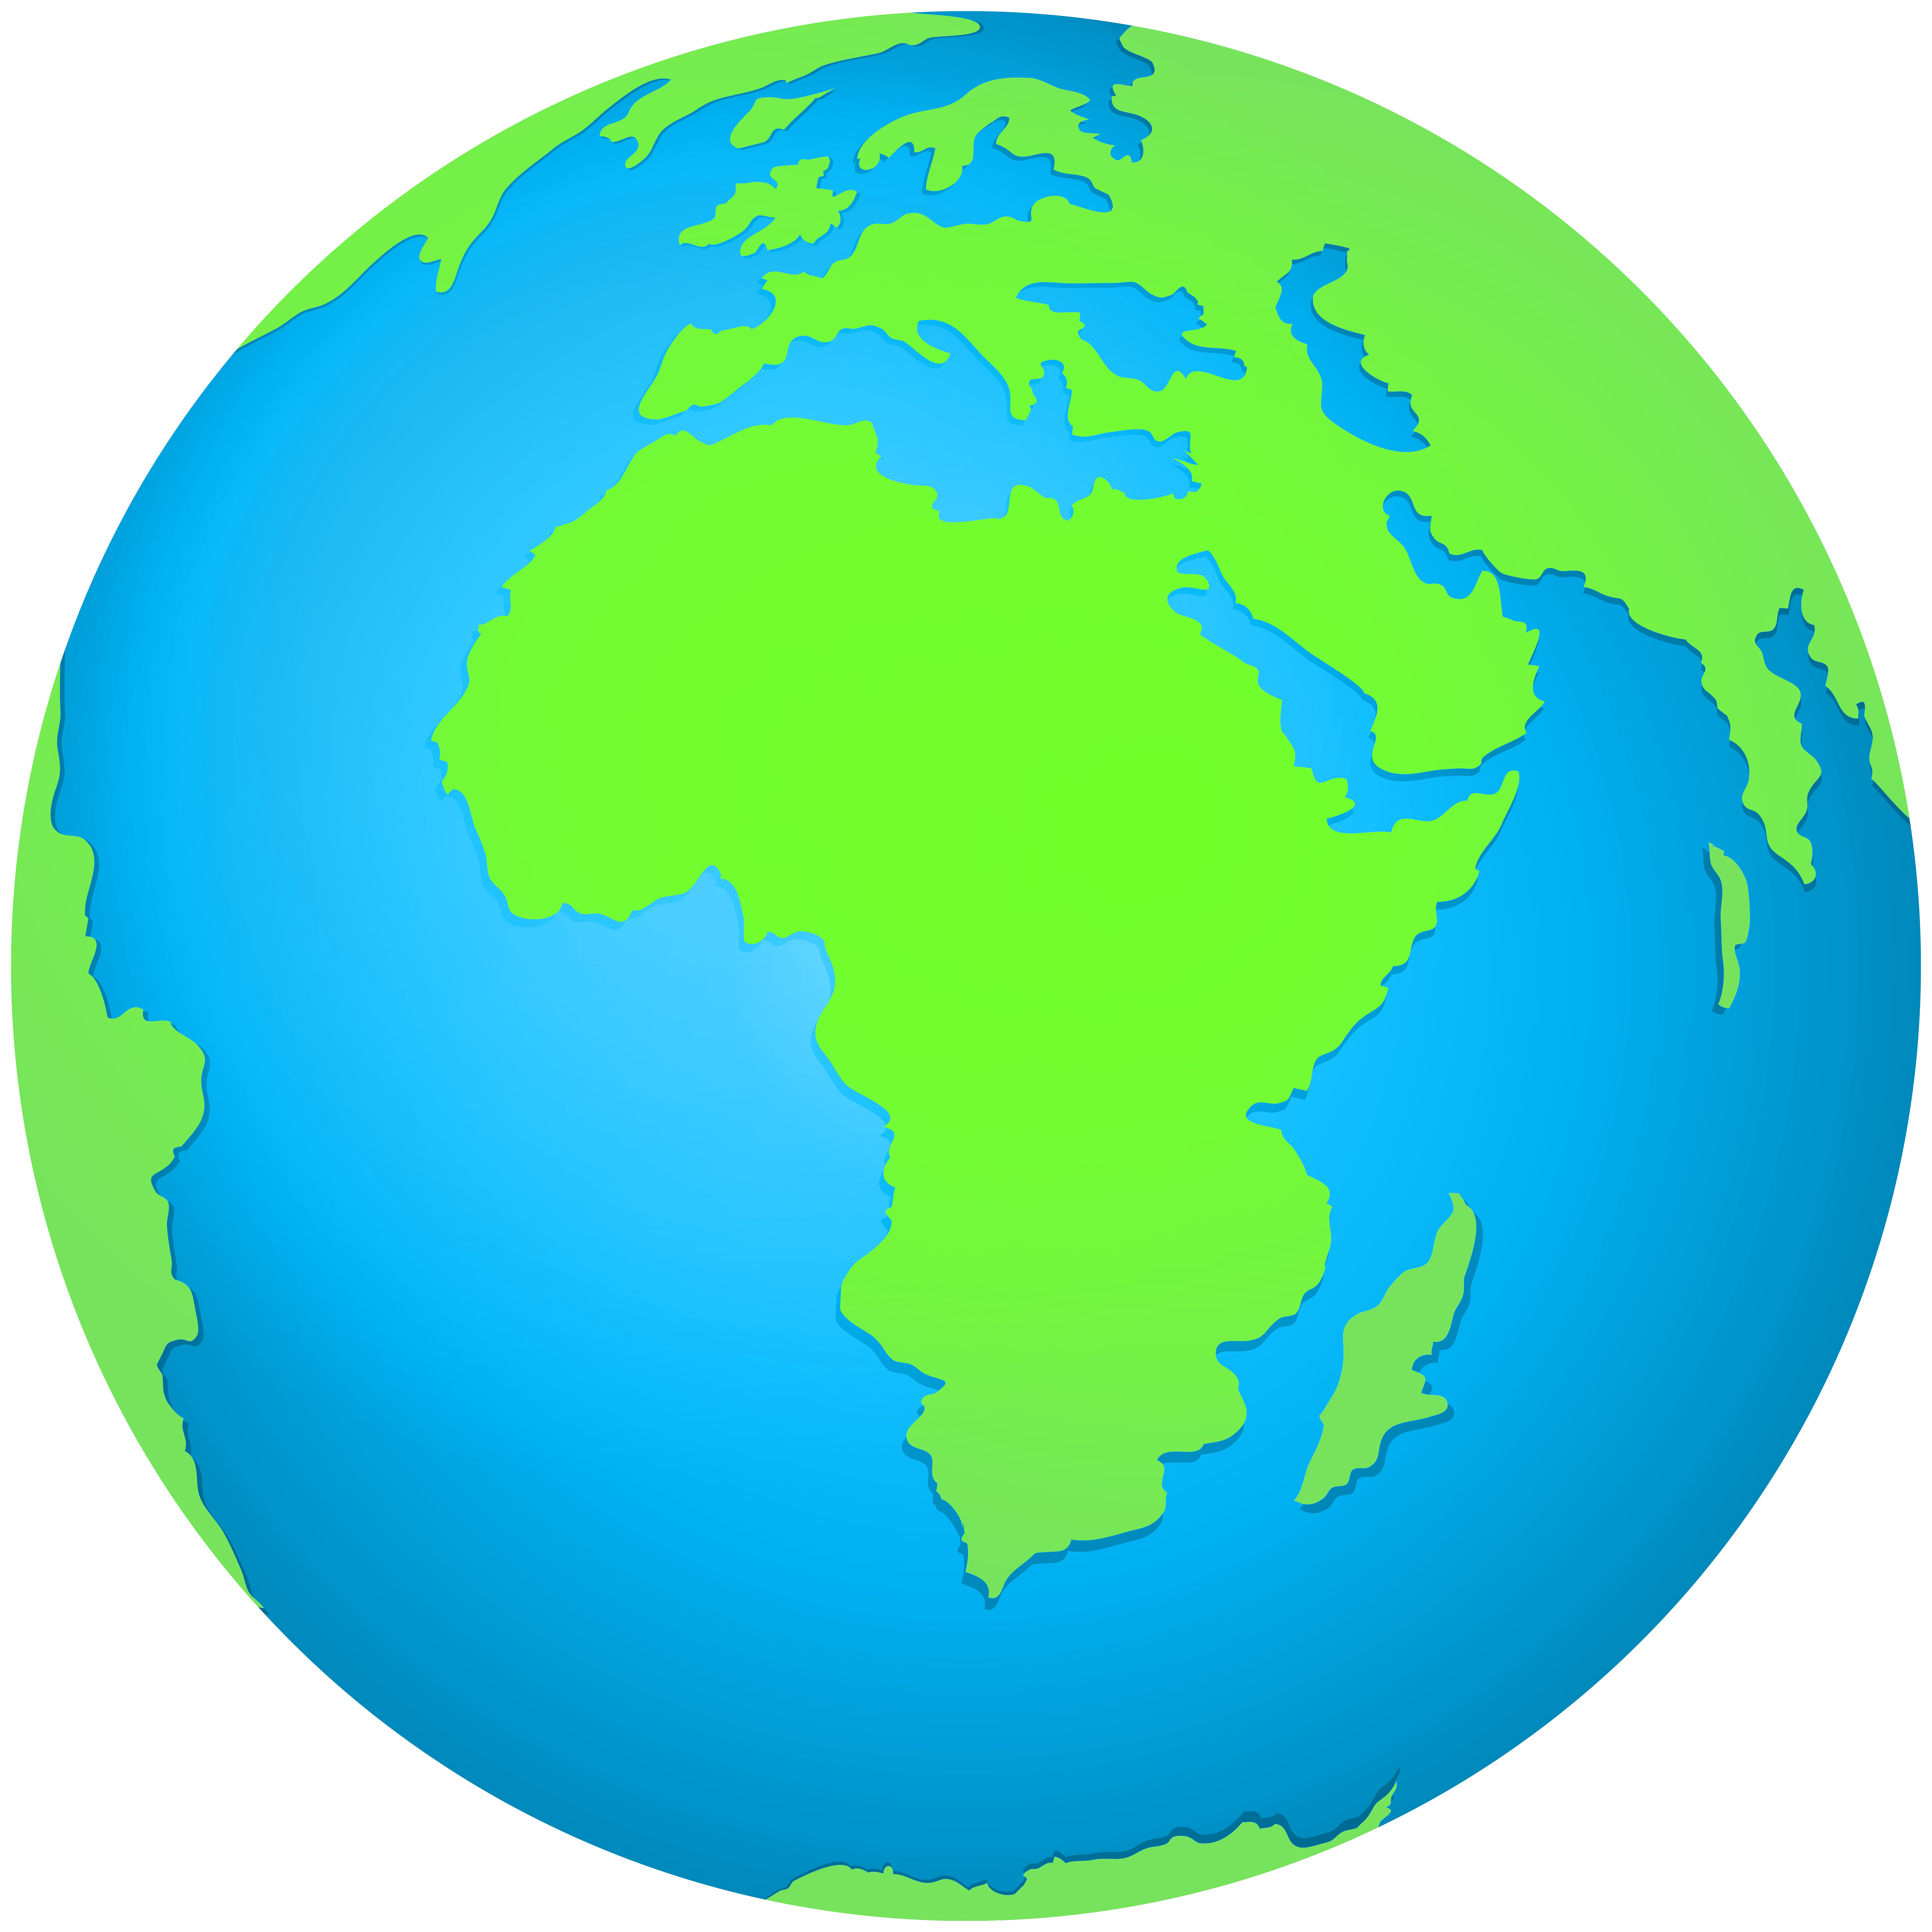 green earth png